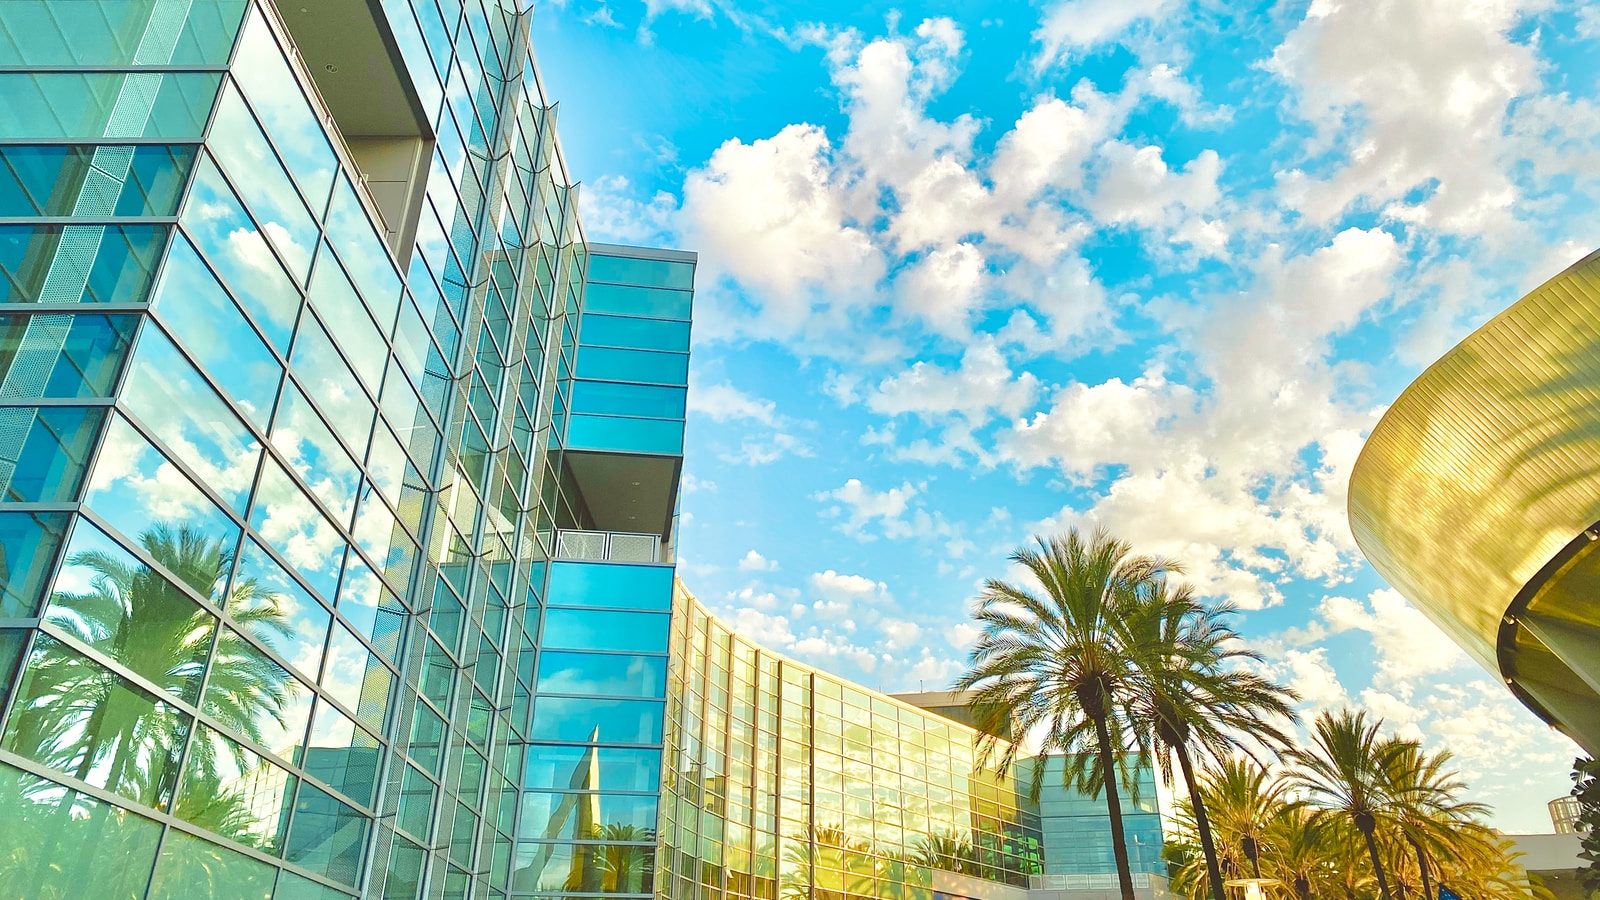 green palm tree near glass building under blue sky during daytime